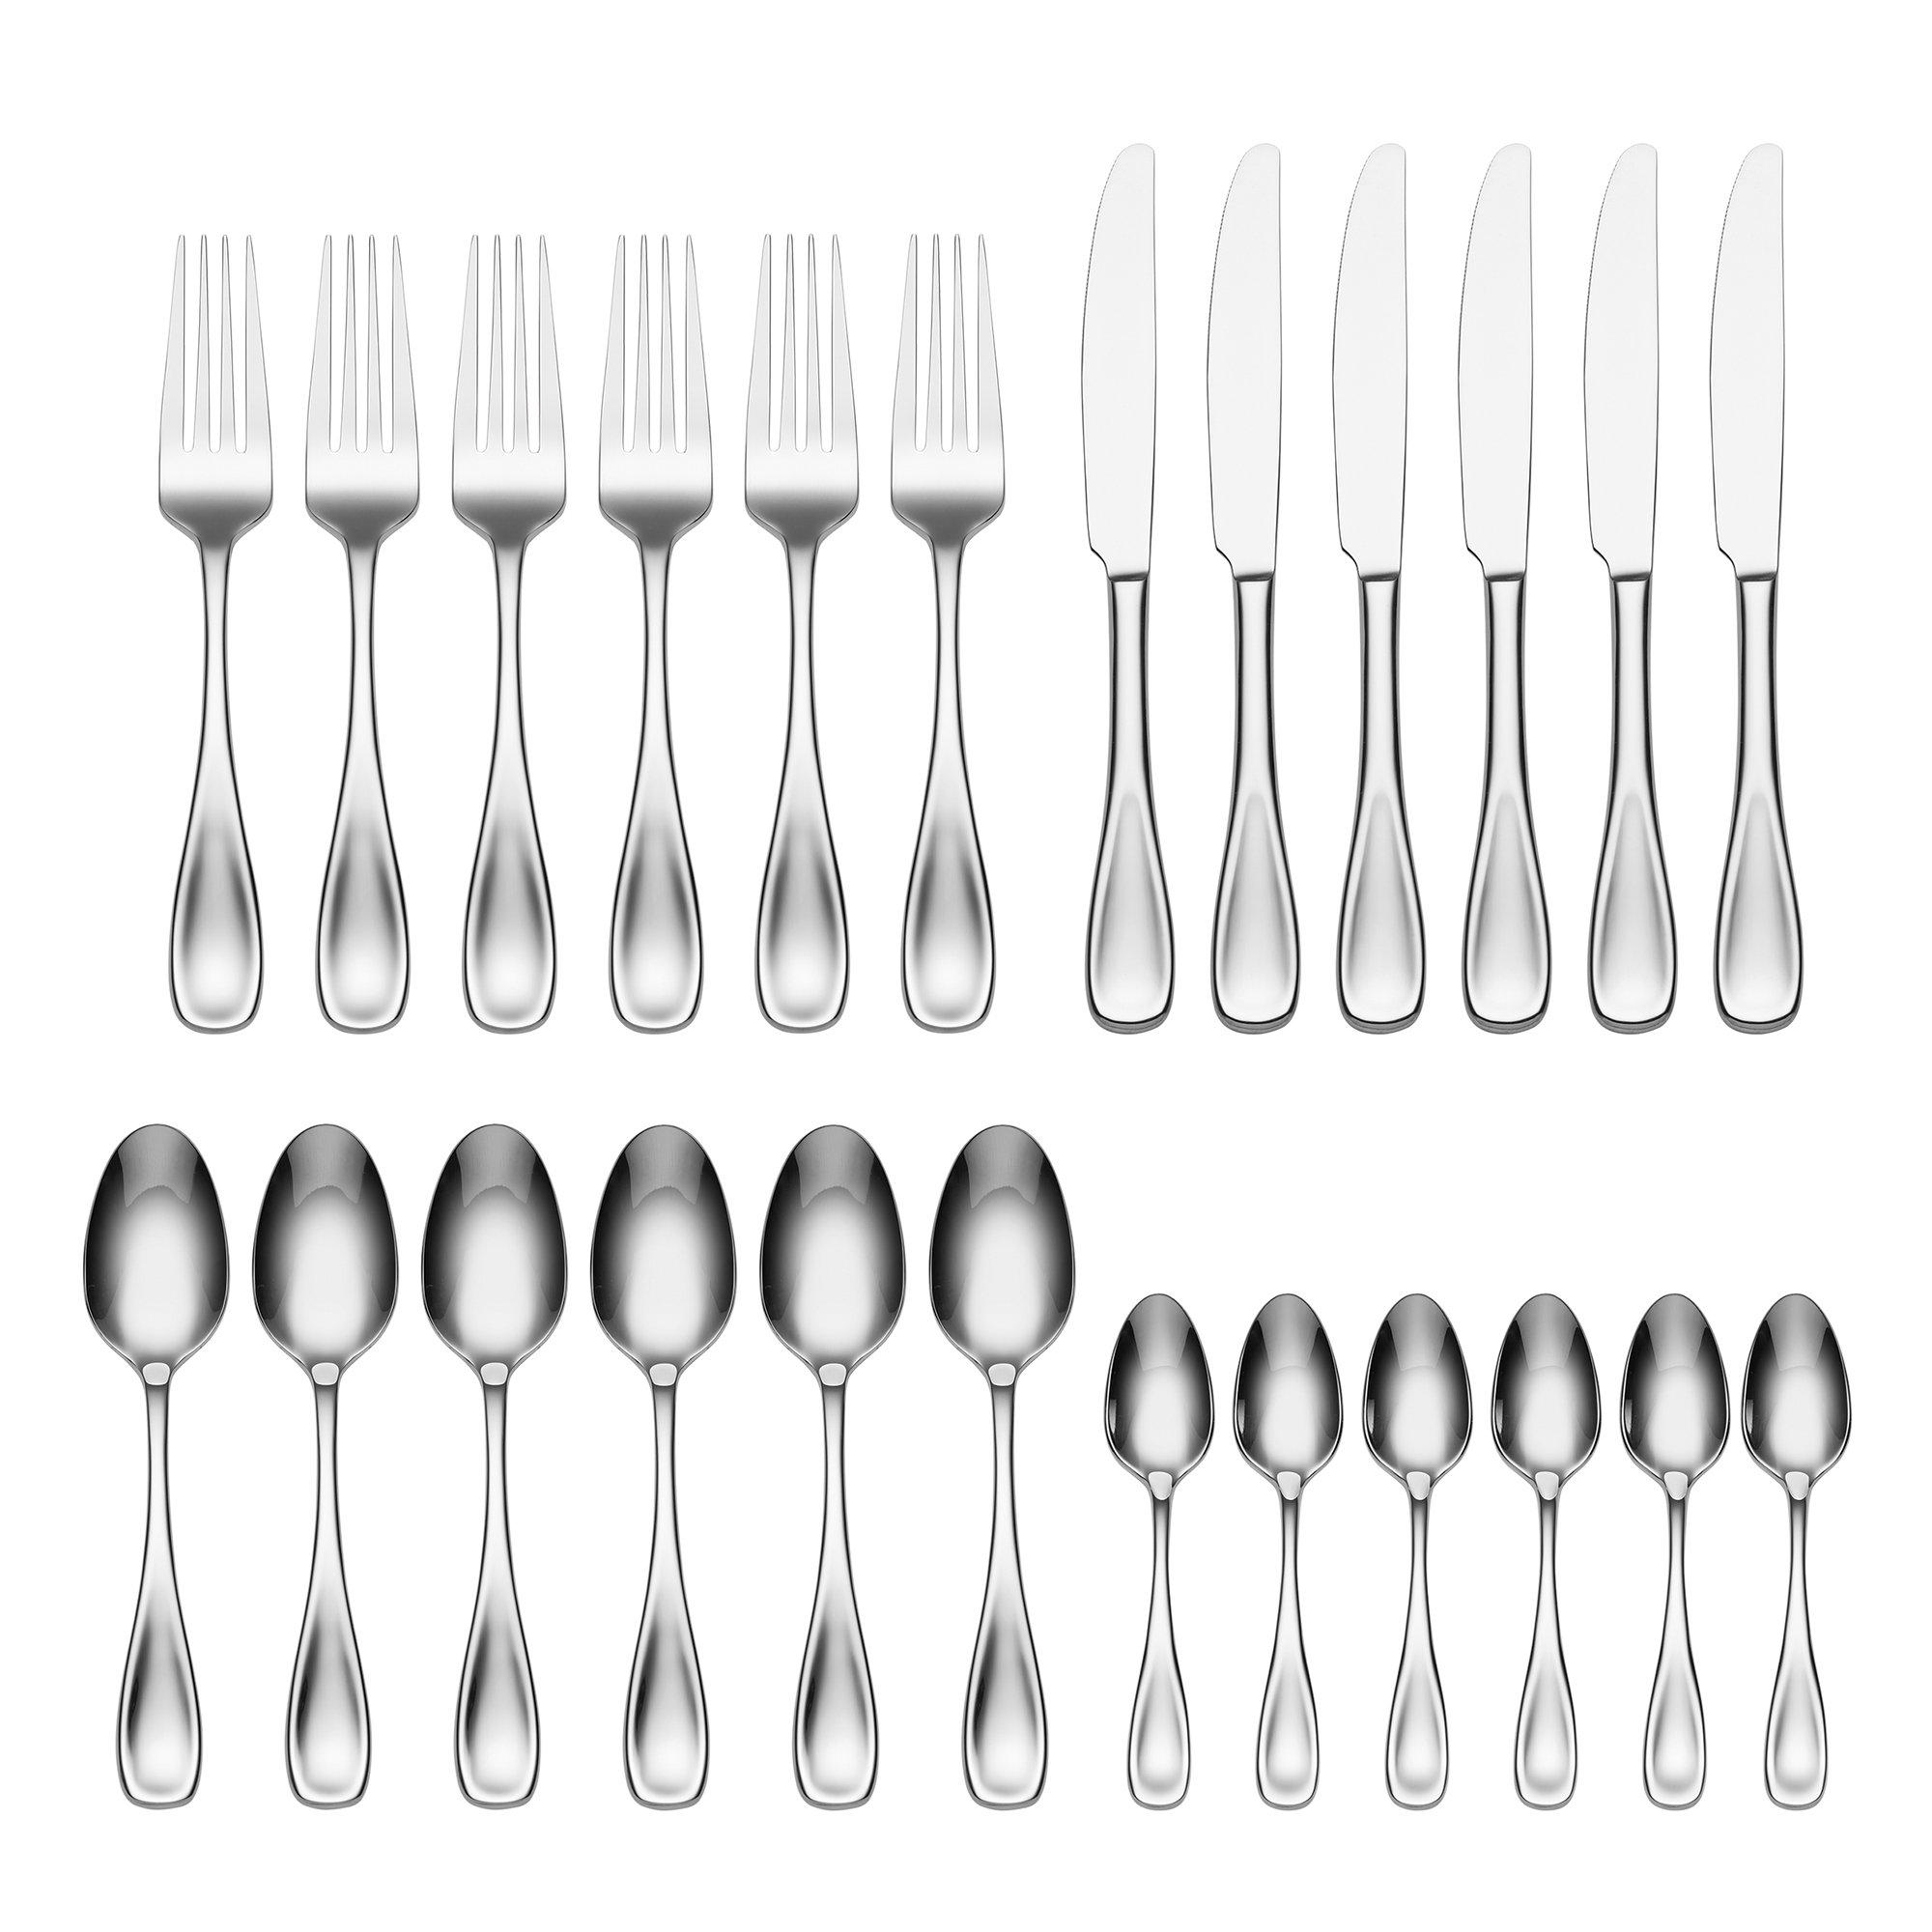 Voss 24 Piece Culterly Set, Stainless Steel, Rust Resistant, Dishwasher Safe